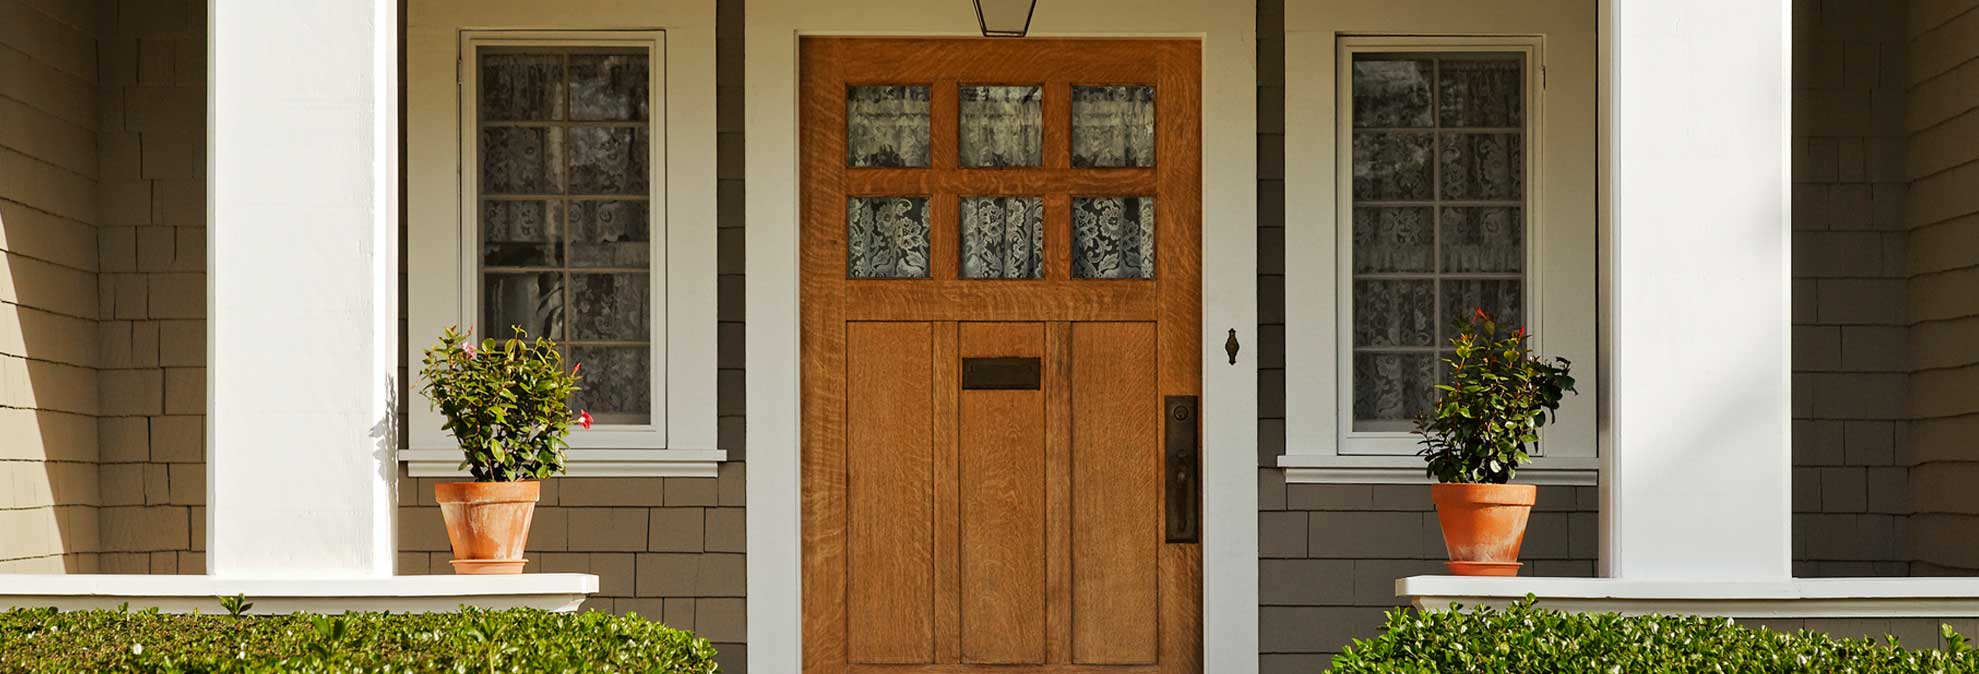 entry doors best entry door buying guide - consumer reports VLMUKXB